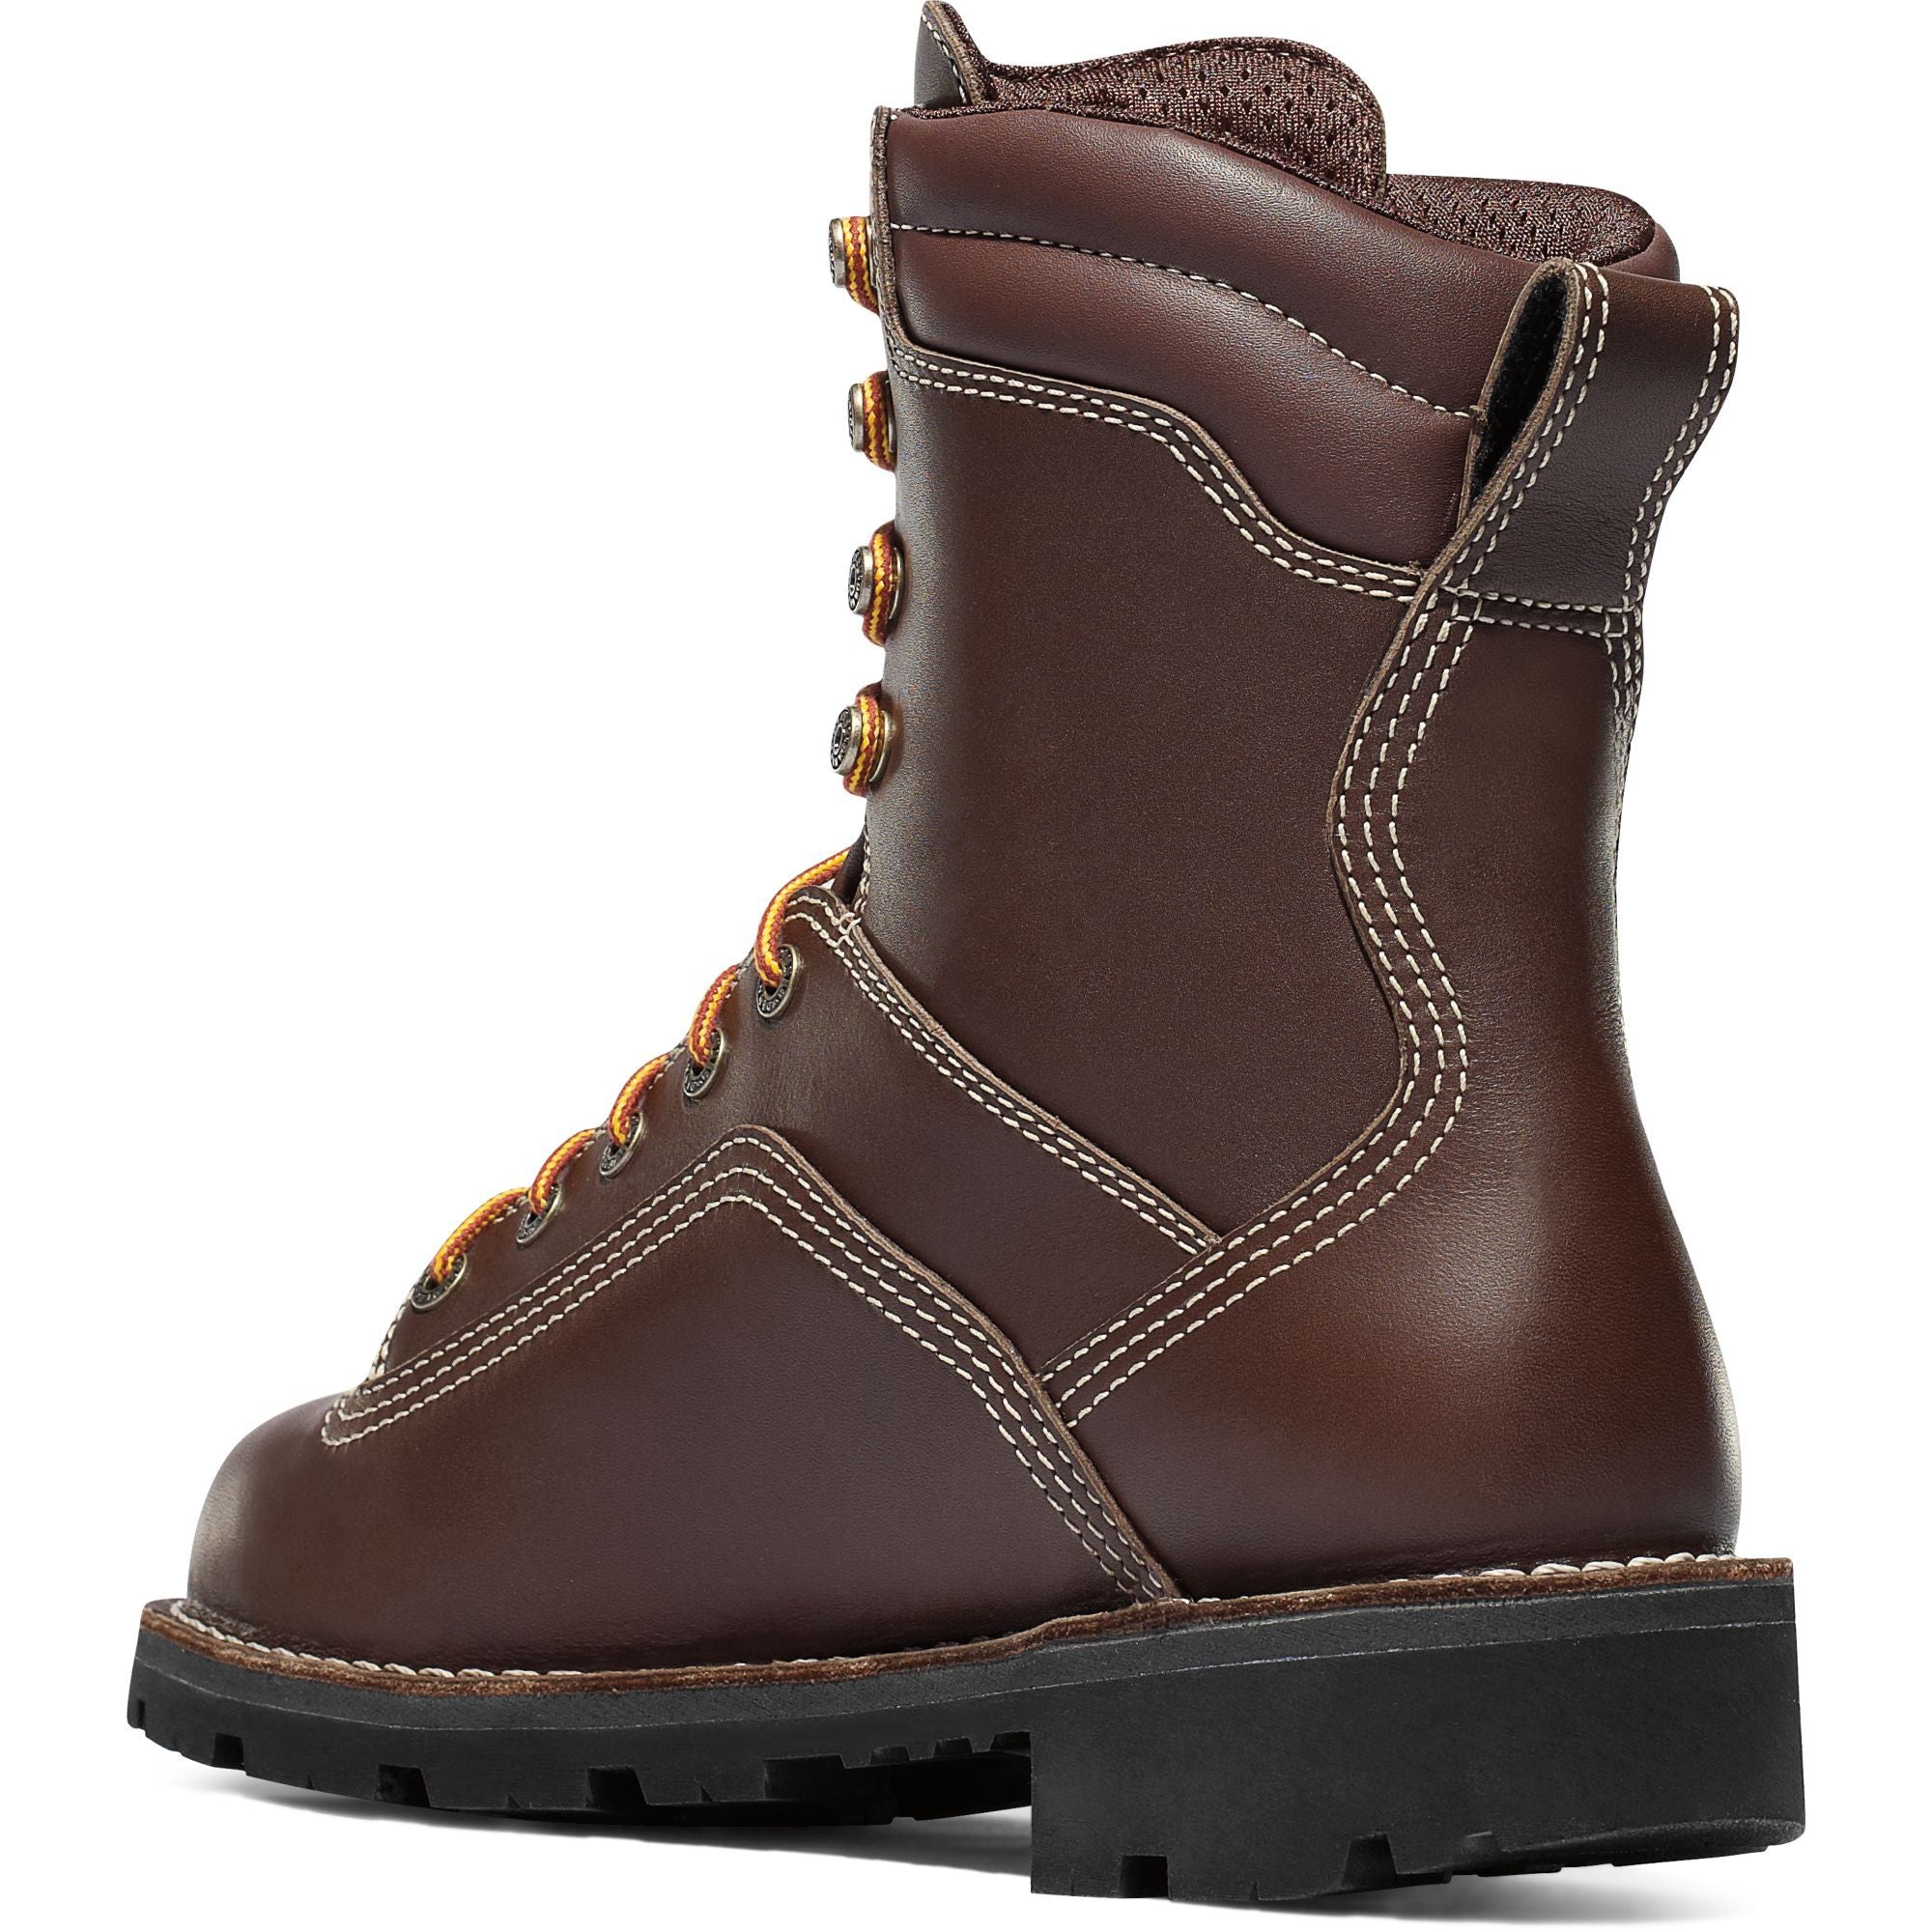 Danner Men's Quarry USA Made 8" Soft Toe WP Work Boot - Brown - 17305  - Overlook Boots